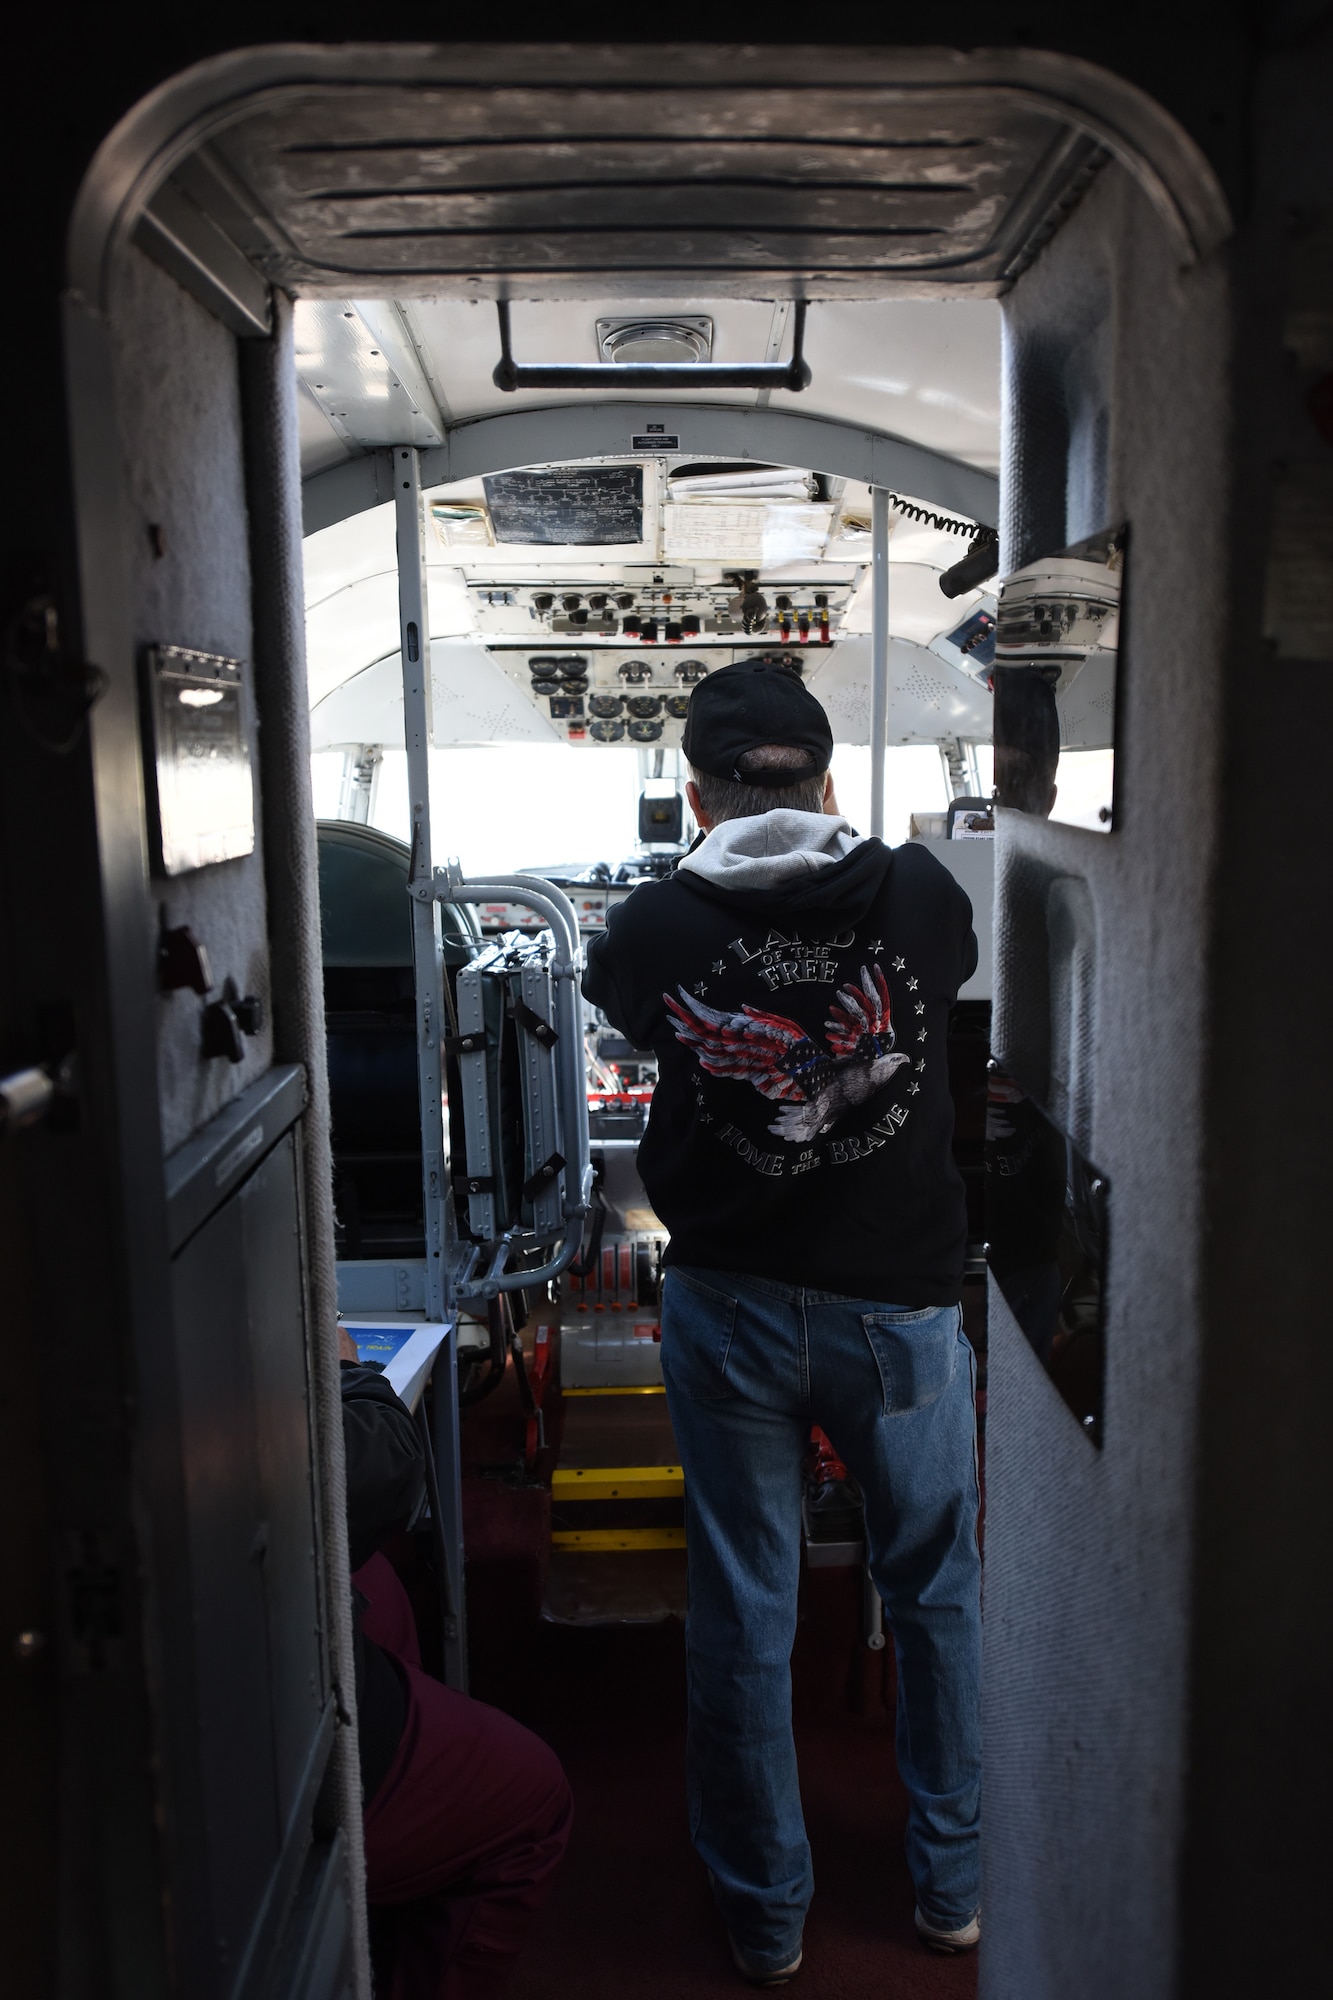 A patron takes photos in the cockpit of a C-54E Skymaster named “Spirit of Freedom” at the Great Falls International Airport, Sept. 9, 2016. The Spirit of Freedom is a flying museum being flown all over the country by members of the Berlin Airlift Historical Foundation to help raise awareness of the Berlin Airlift. The airlift was a mission that saved nearly 2.4 million Germans from the Soviet-controlled East Berlin in the late 1940s and this is one of the only flight-worthy C-54s remaining in the world. (U.S. Air Force photo/Tech. Sgt. Chad Thompson)